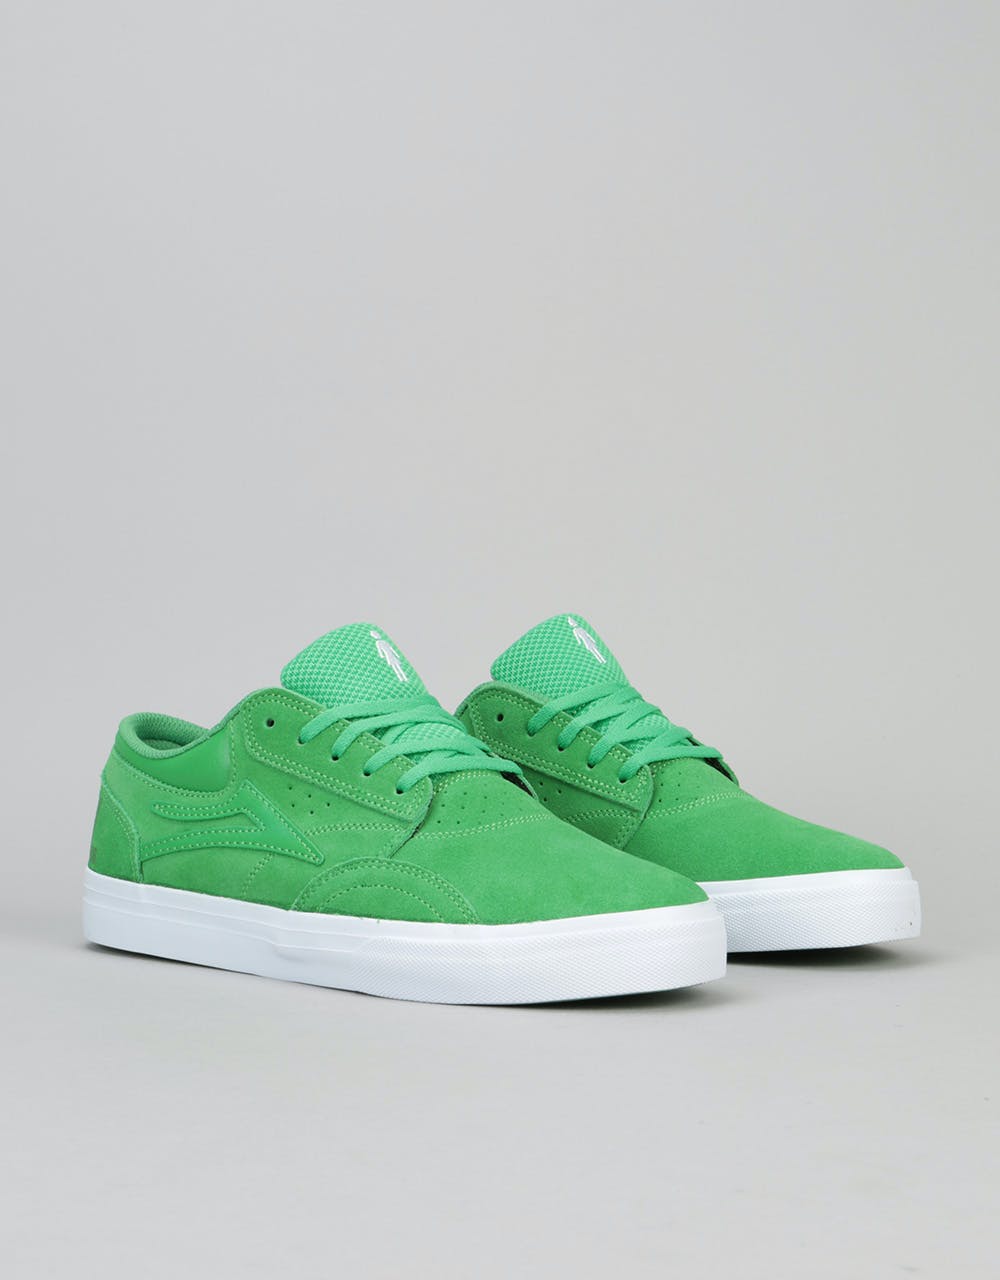 Lakai x Girl Griffin Skate Shoes - Green Suede